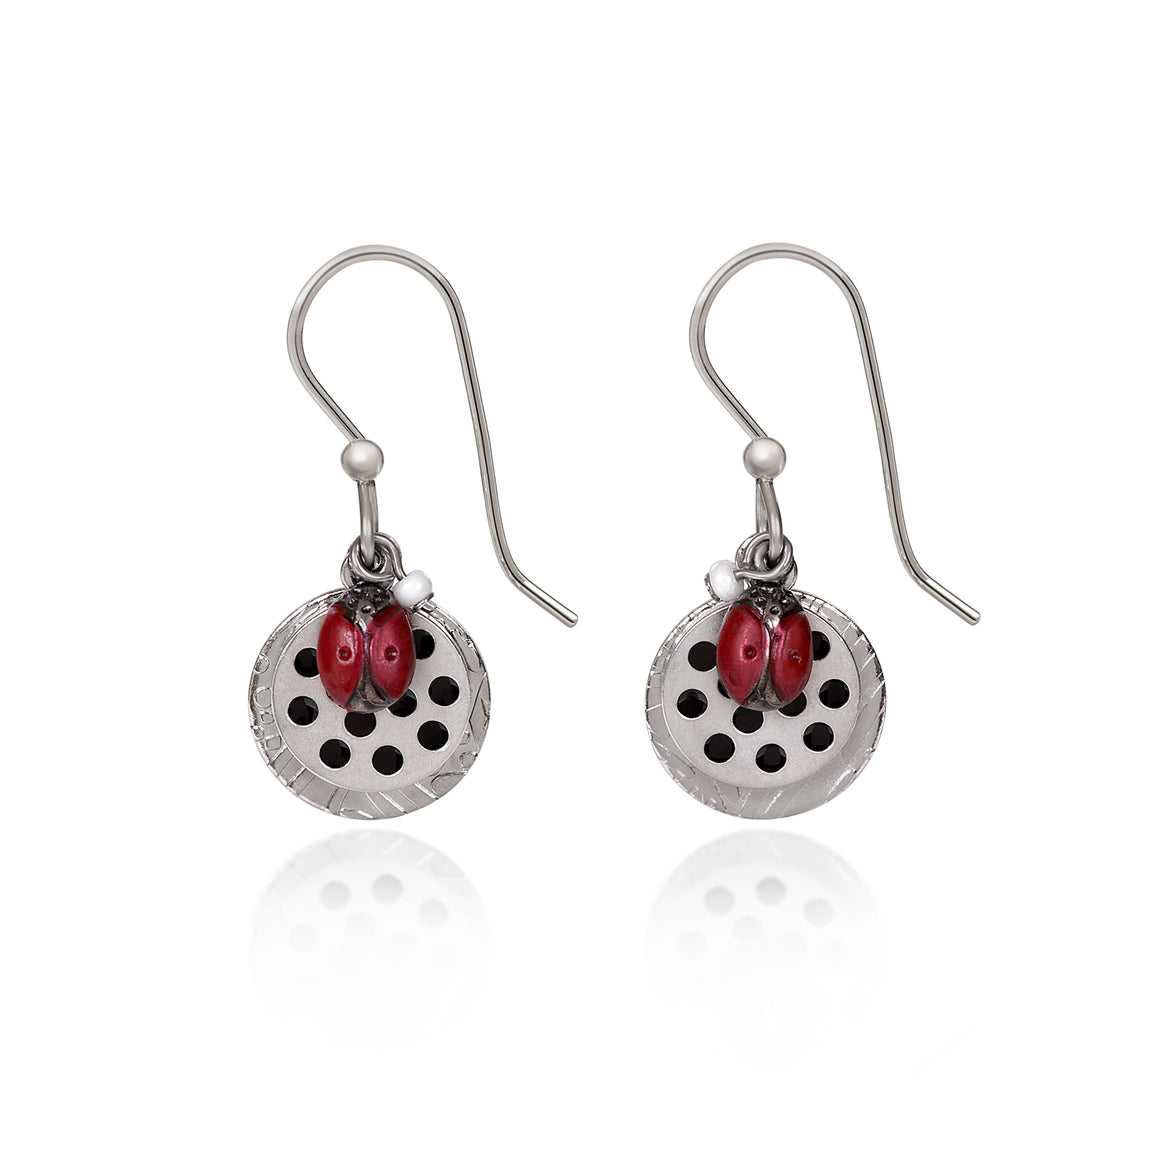 SILVER LADYBUG ON DISCS - SILVER FOREST EARRINGS